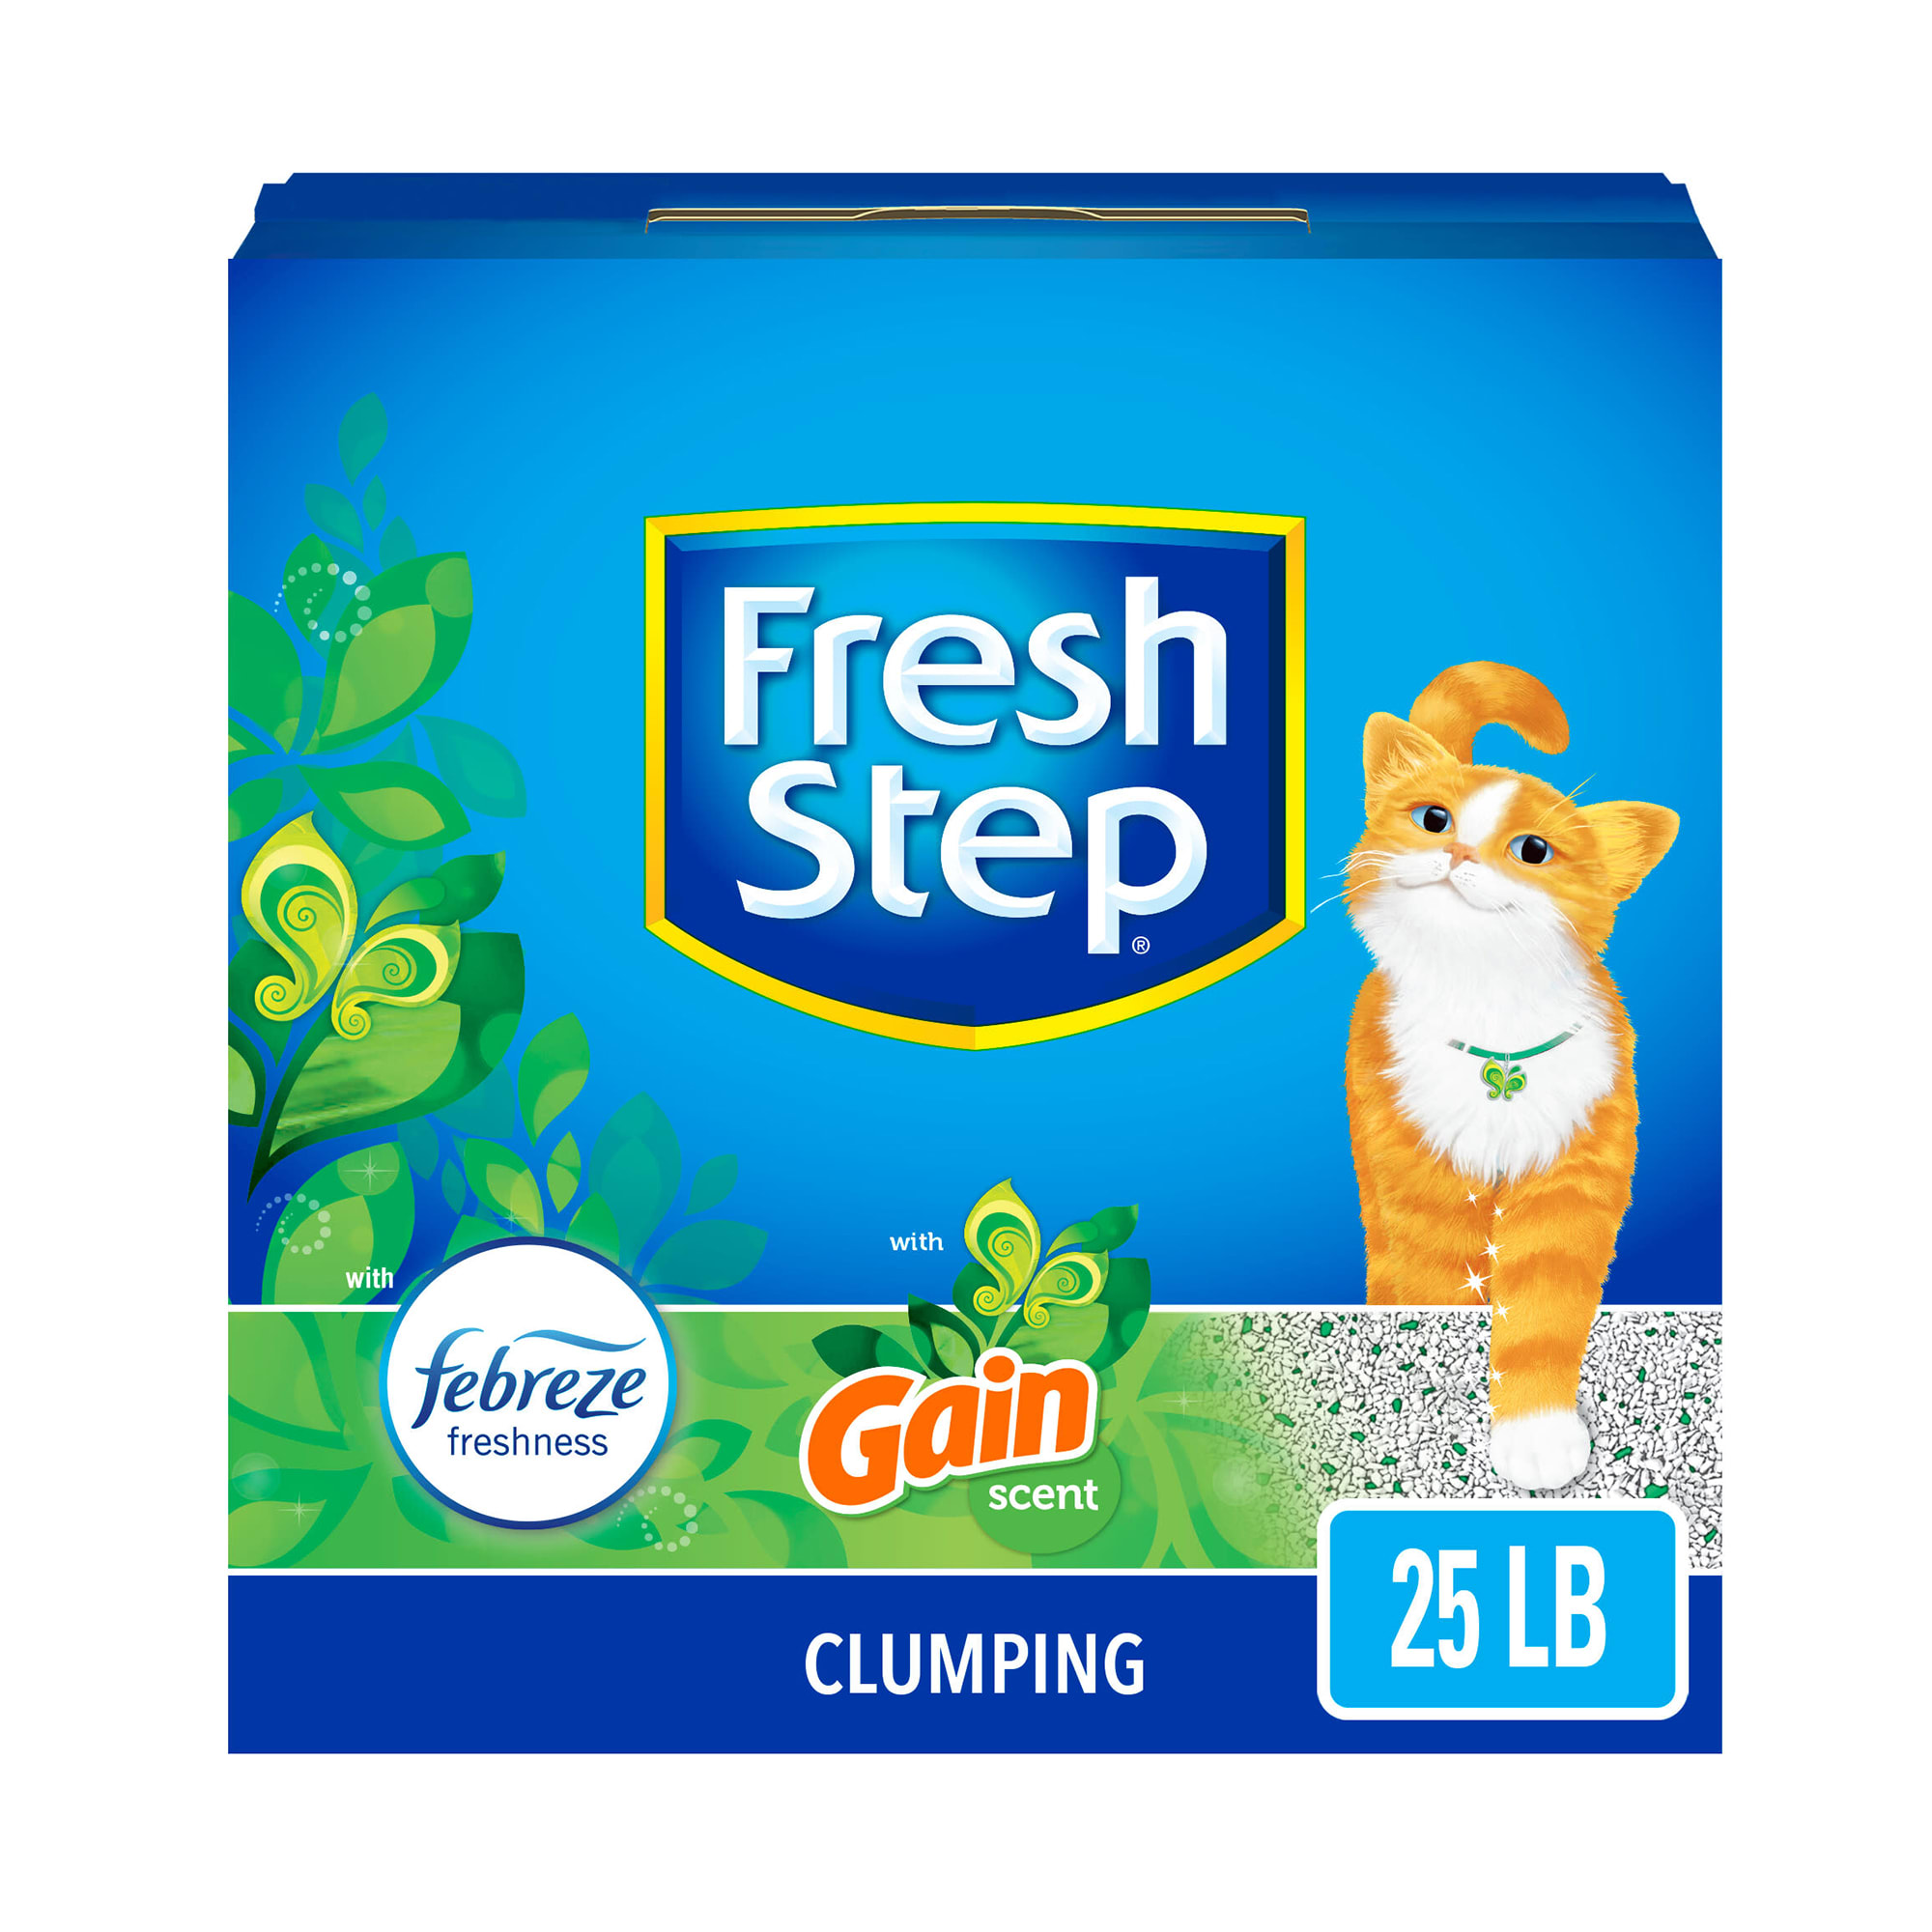 Fresh Step Clumping Power of Febreze with Refreshing Gain Scent Cat